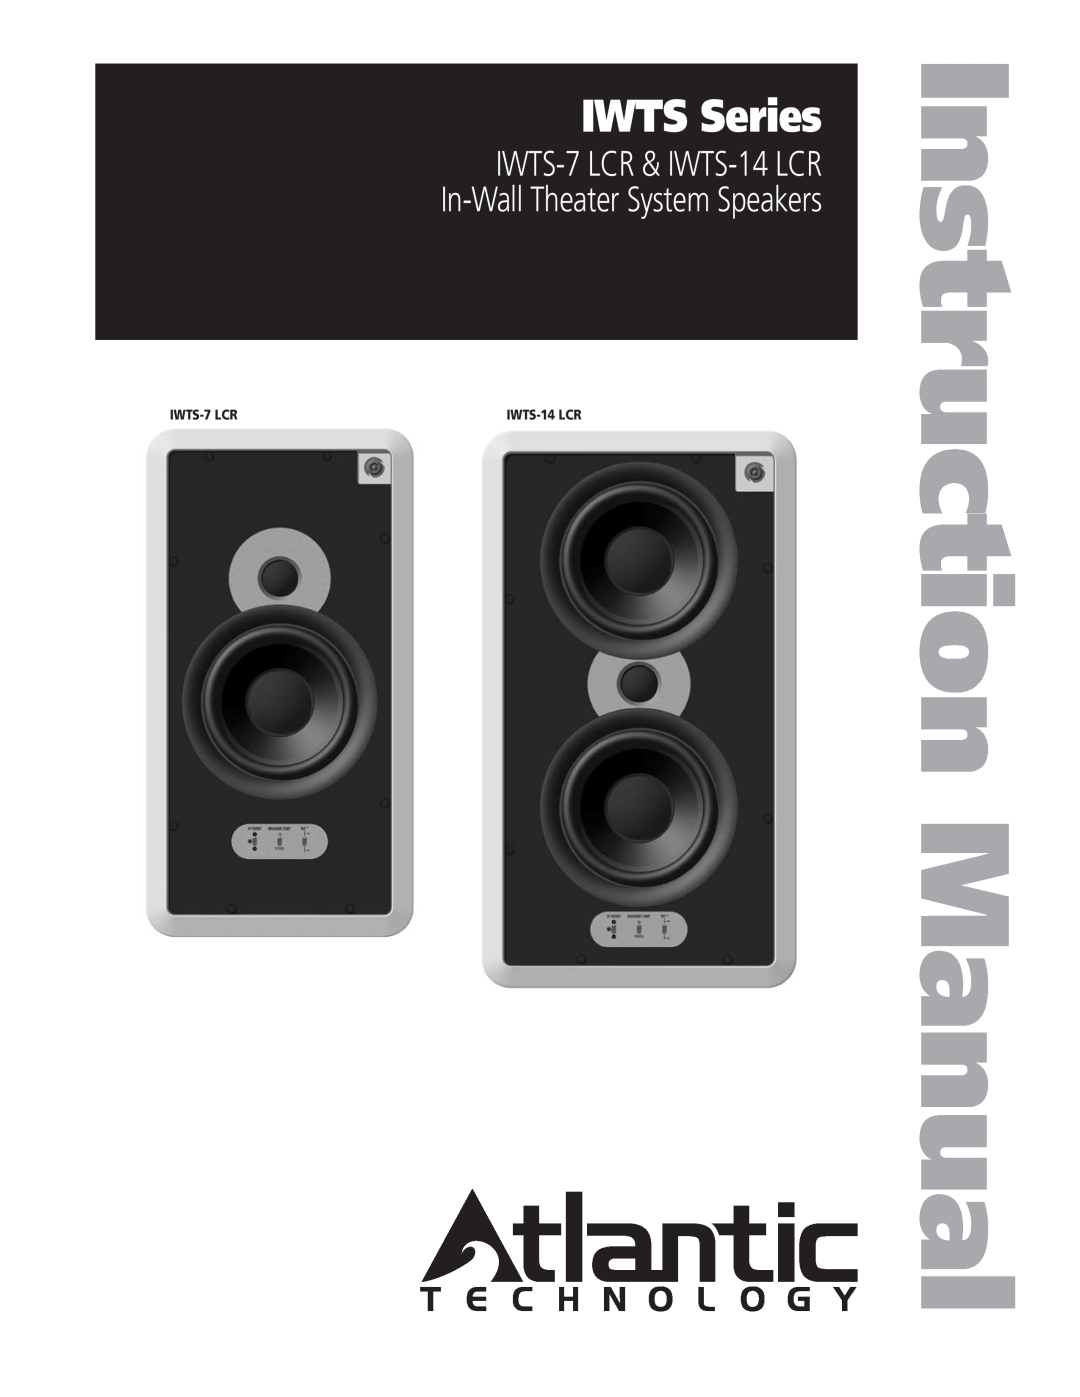 Atlantic Technology IWTS-14 LCR instruction manual IWTS Series, IWTS-7LCR & IWTS-14LCR, In-WallTheater System Speakers 